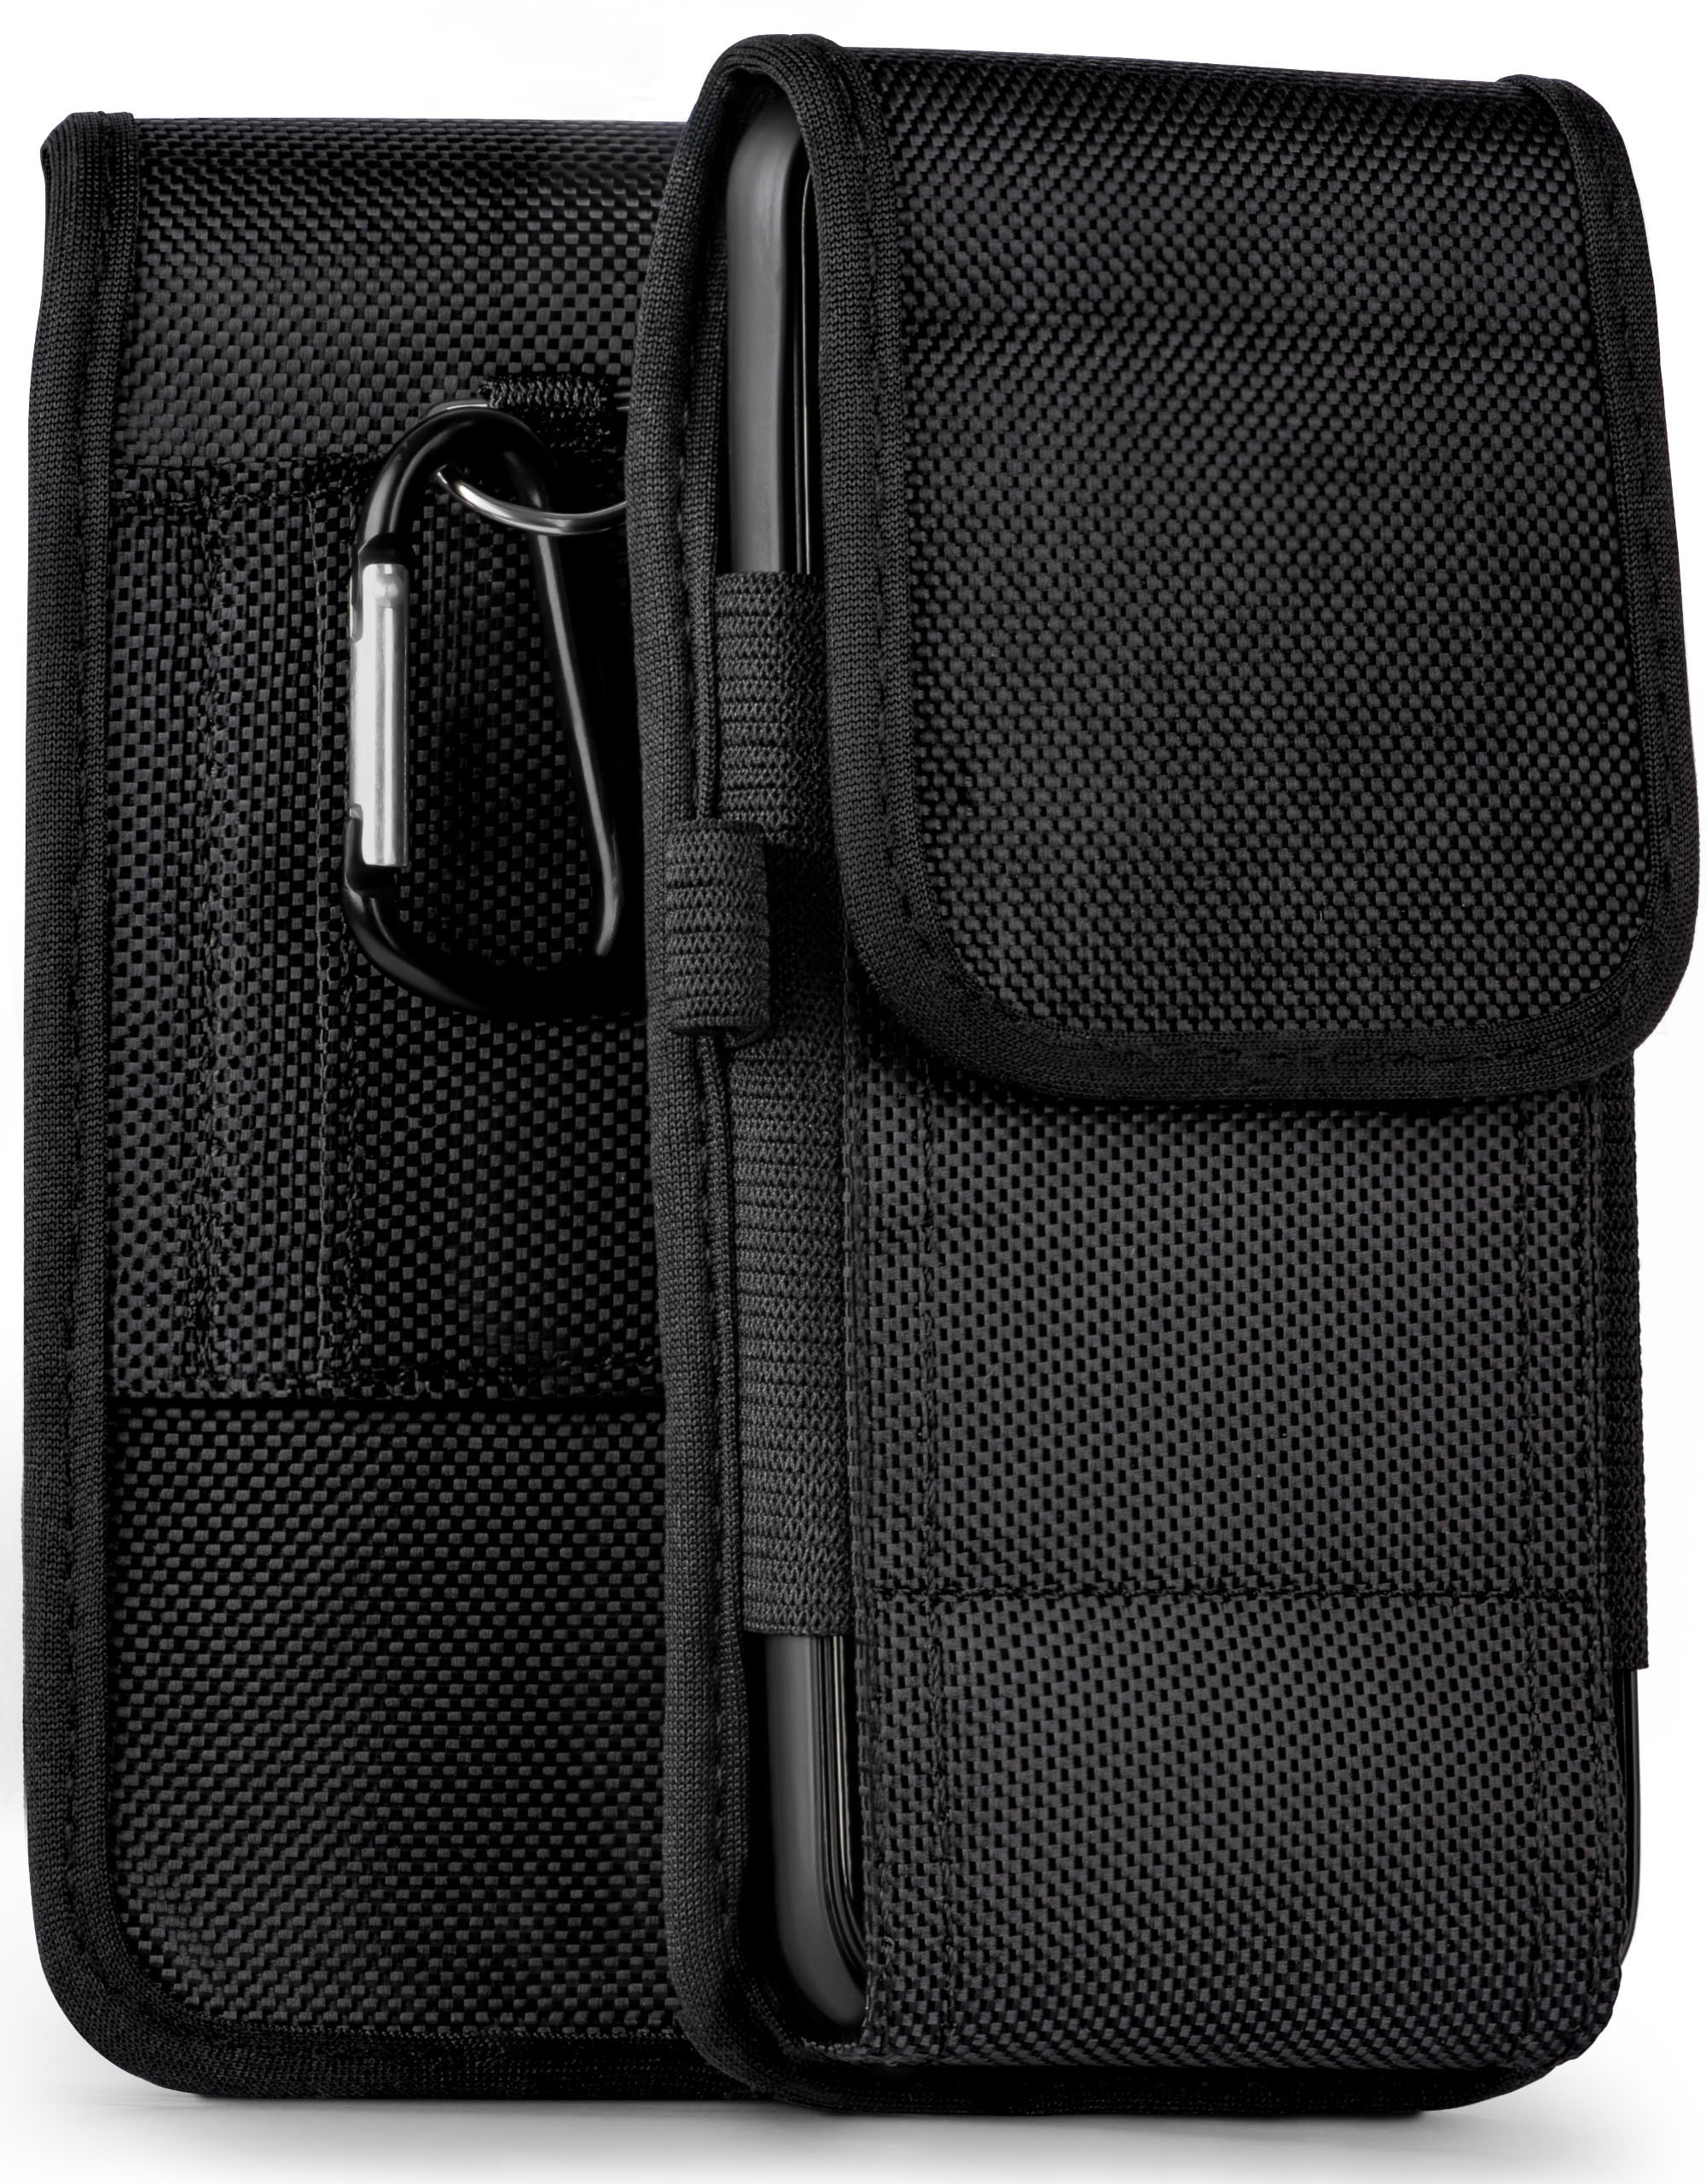 Case, 3GS 3G, iPhone / Holster, Trail Apple, MOEX iPhone Agility